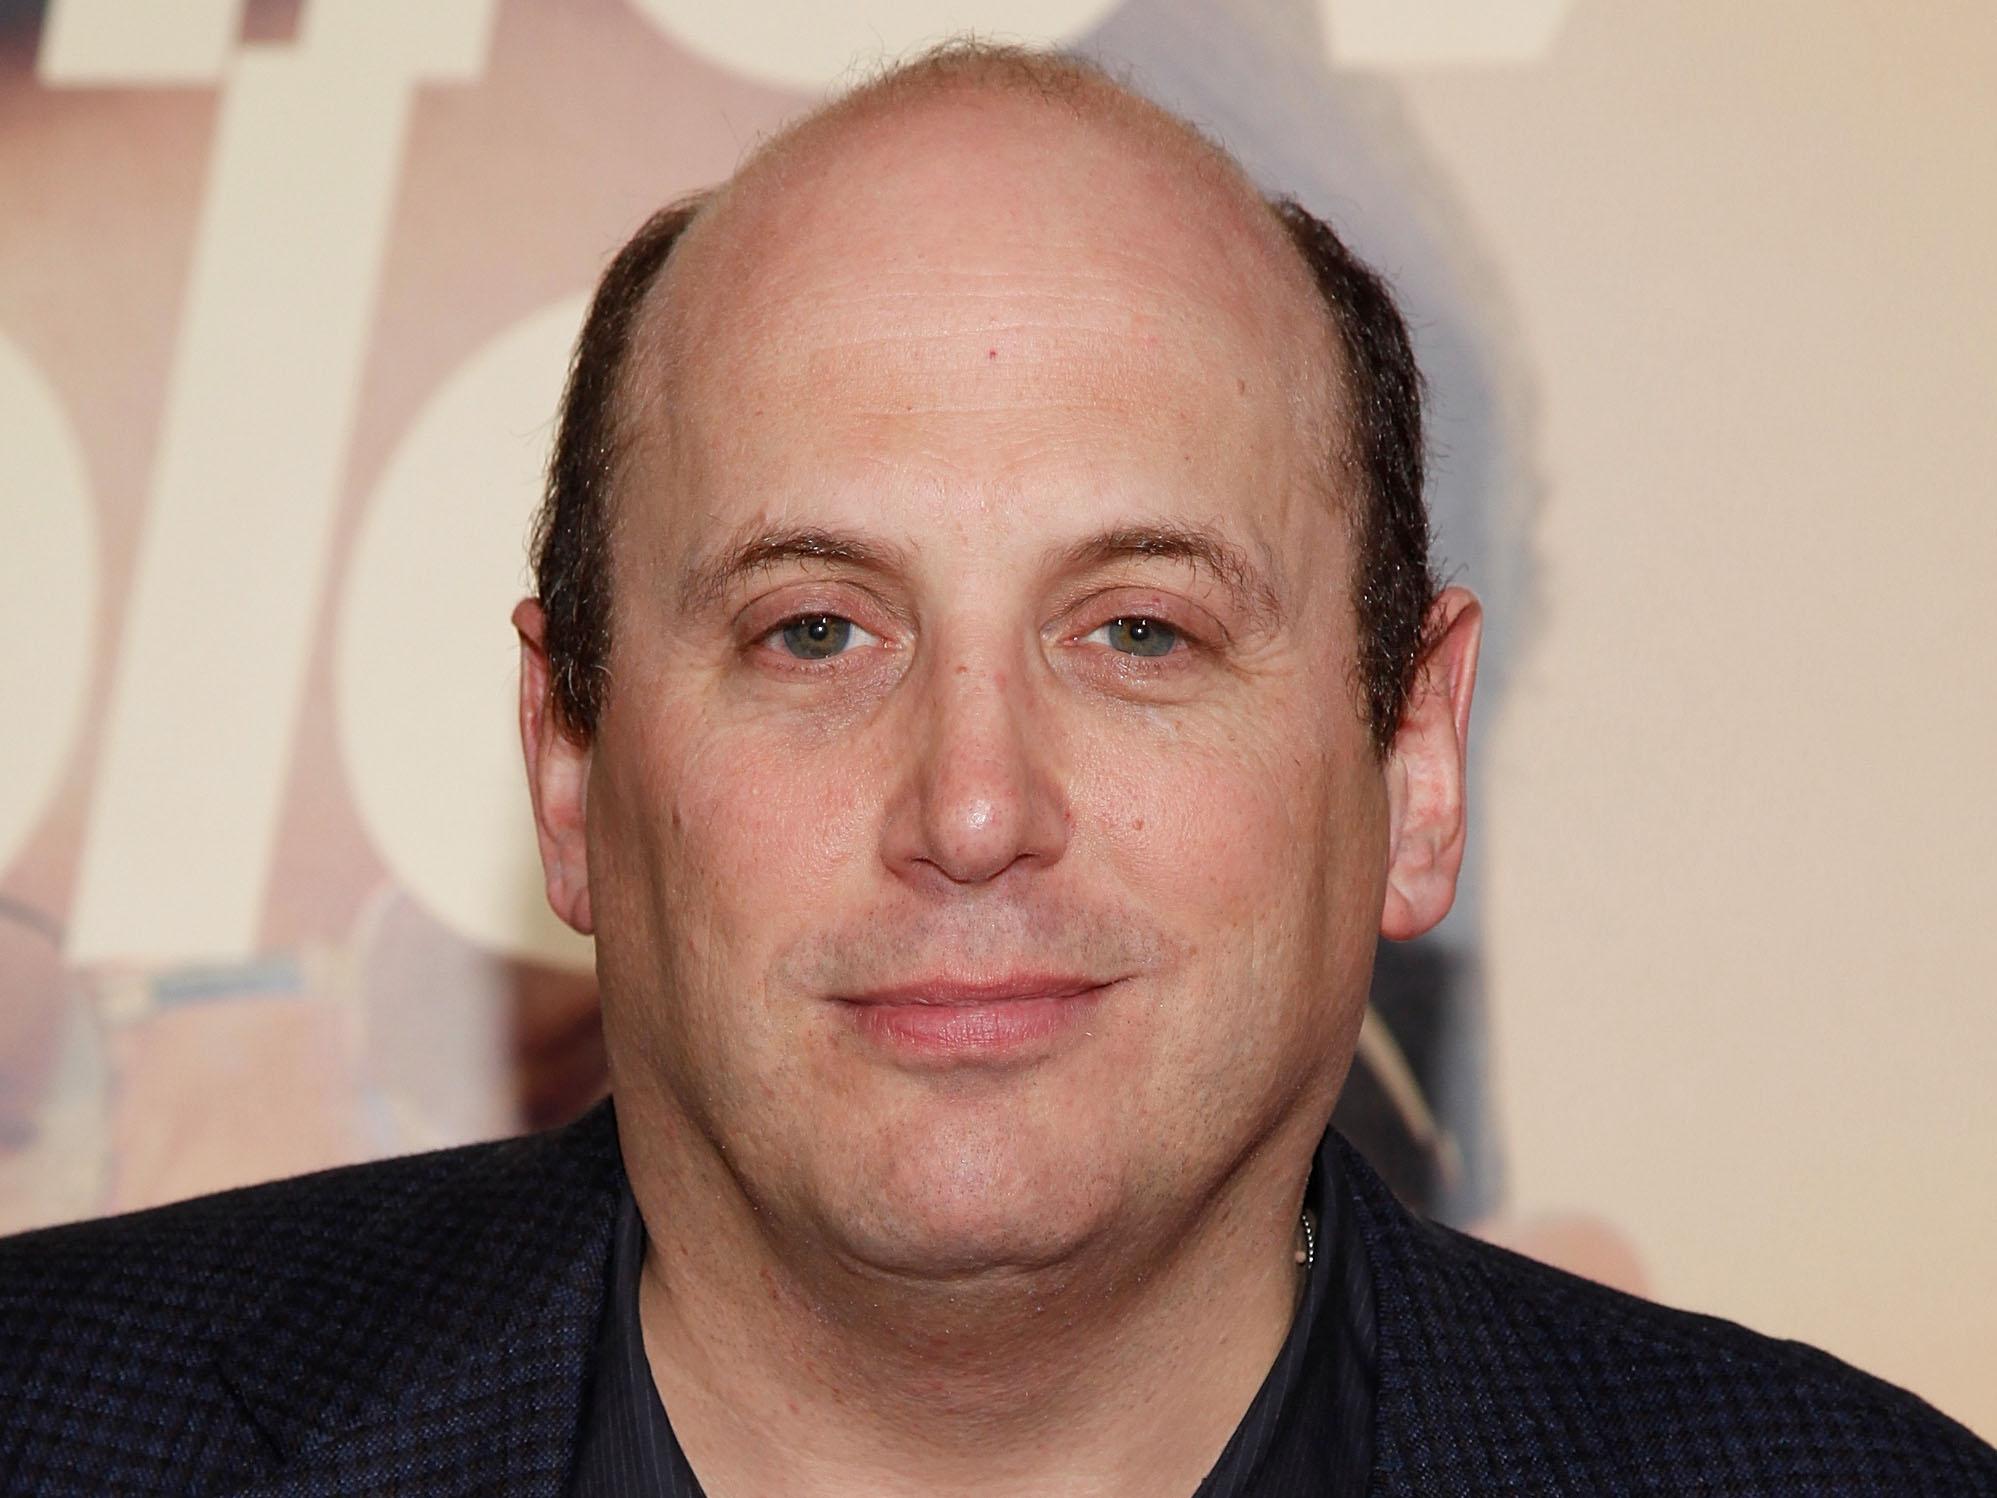 Writer Kurt Eichenwald was targeted with a flashing image in 2016 after he posted criticism of Donald Trump on social media